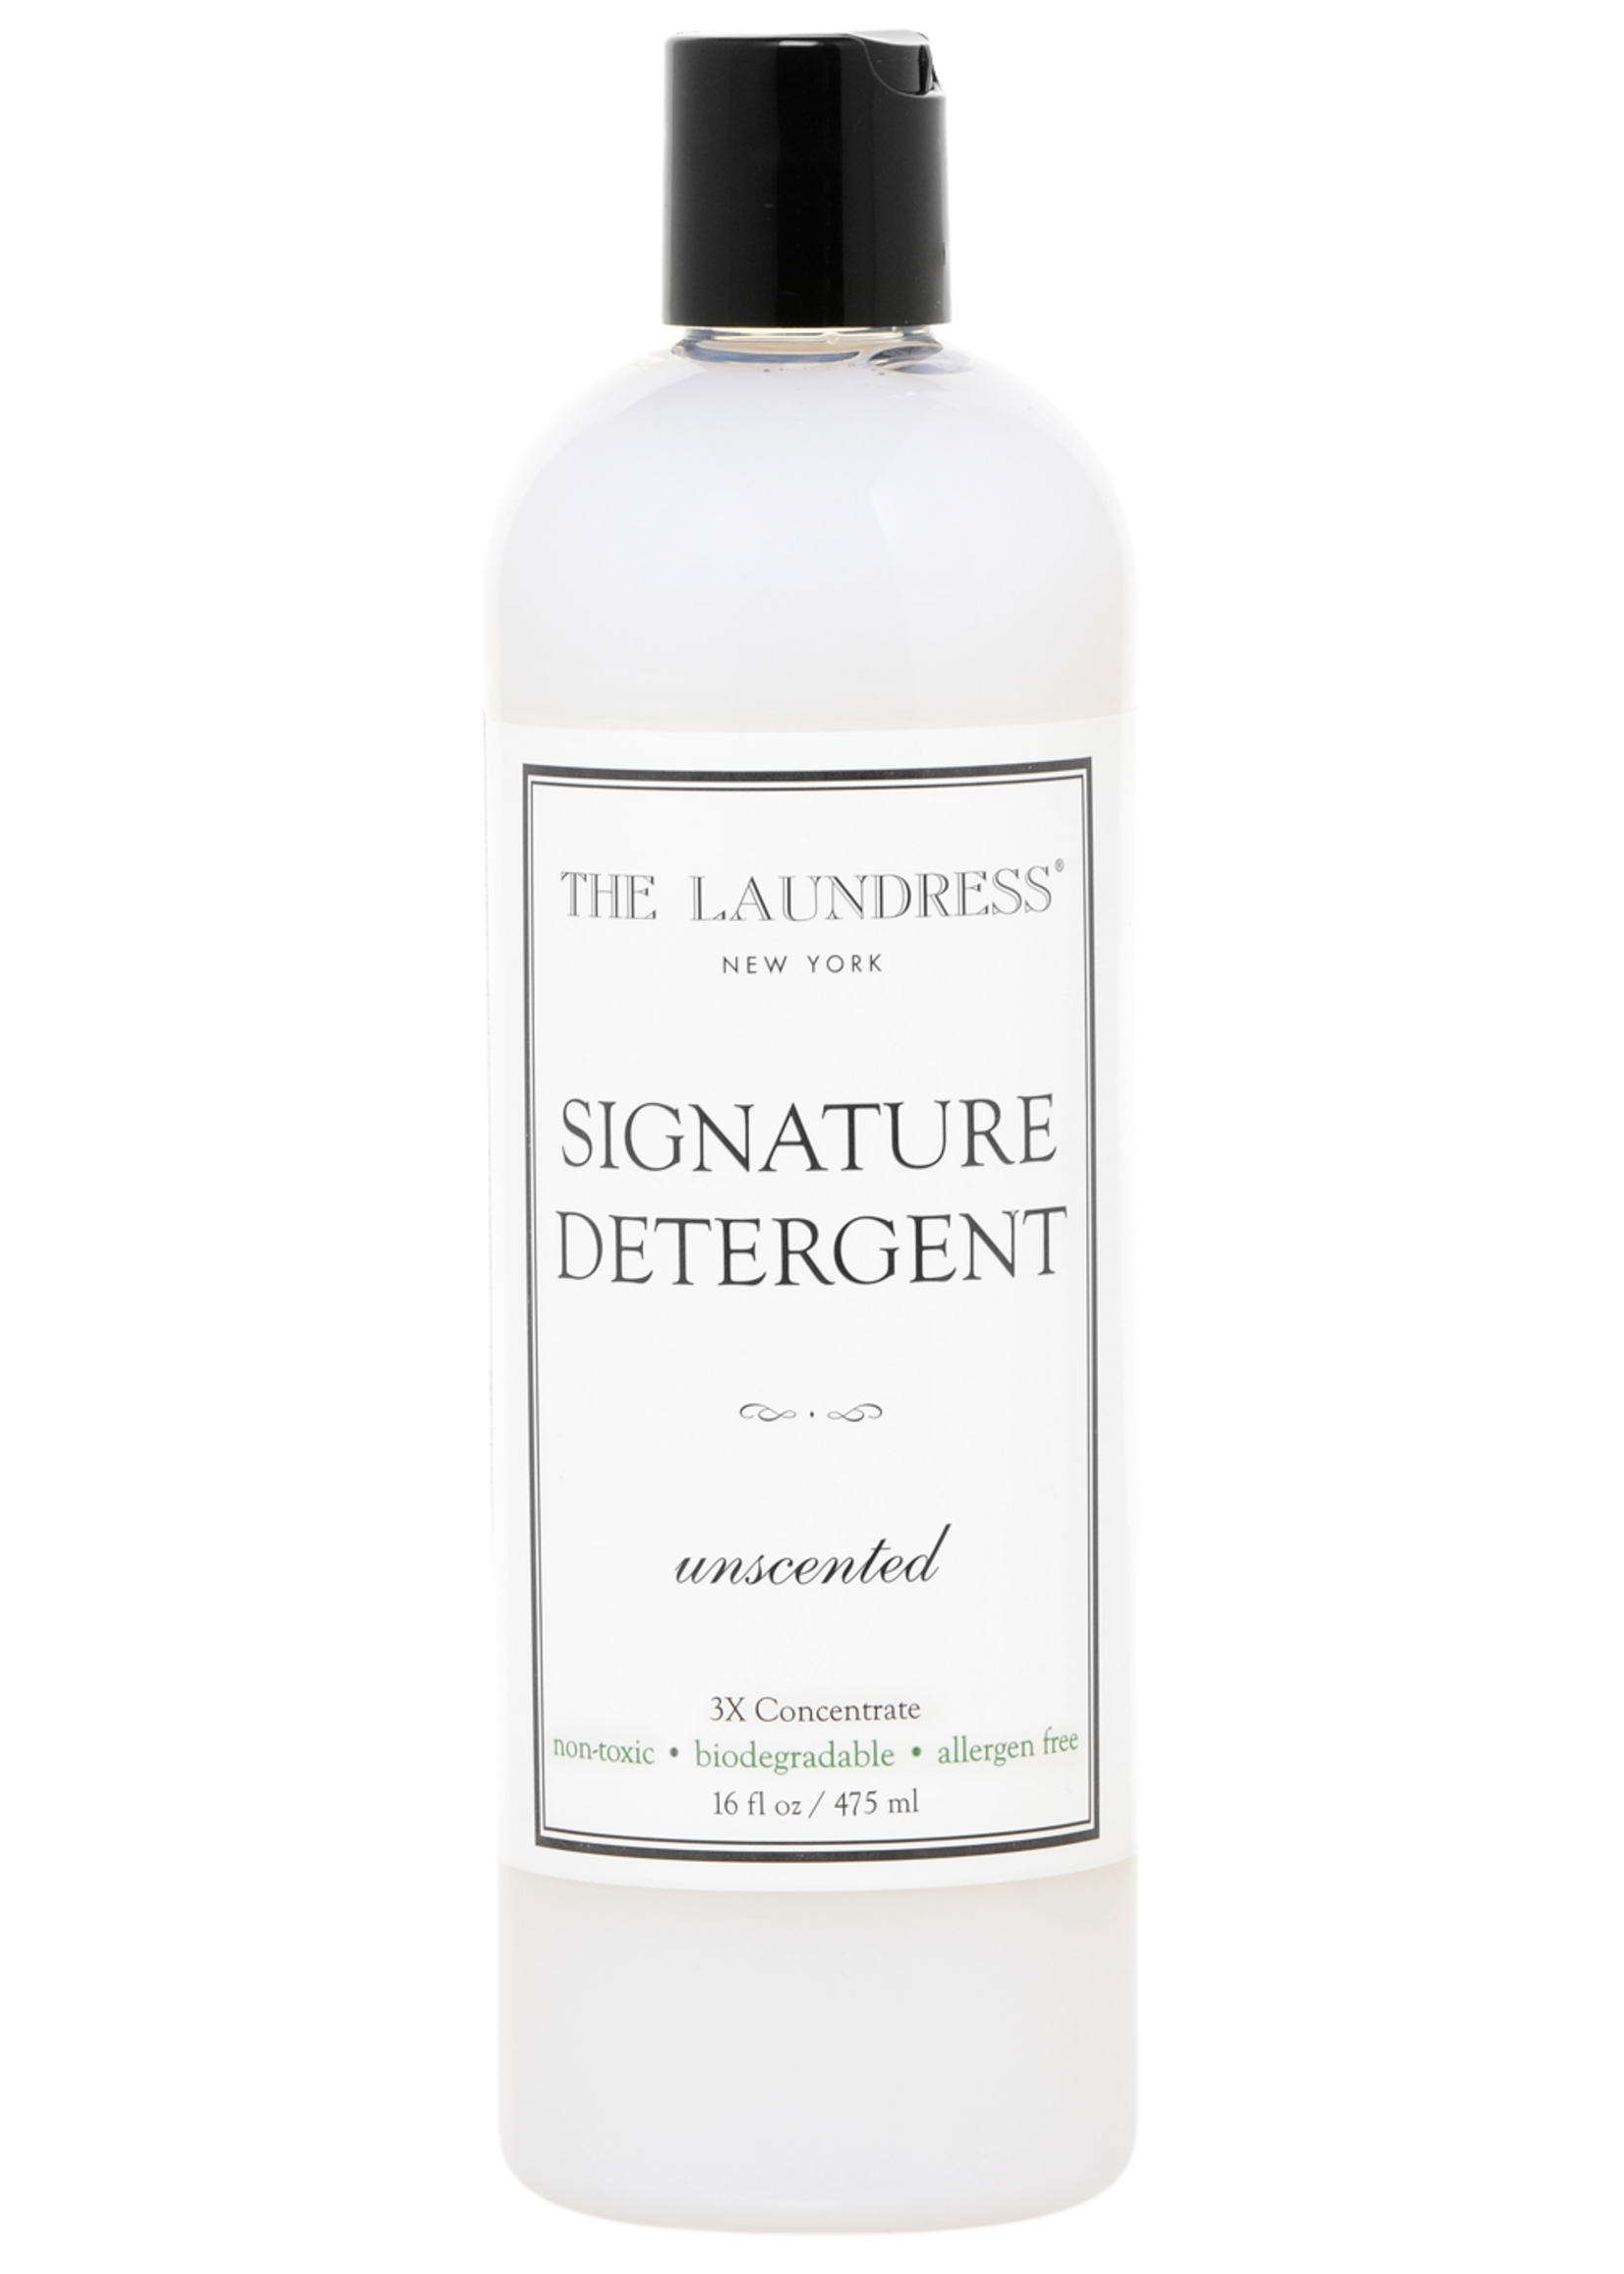 The Laundress New York Unscented Signature Detergent